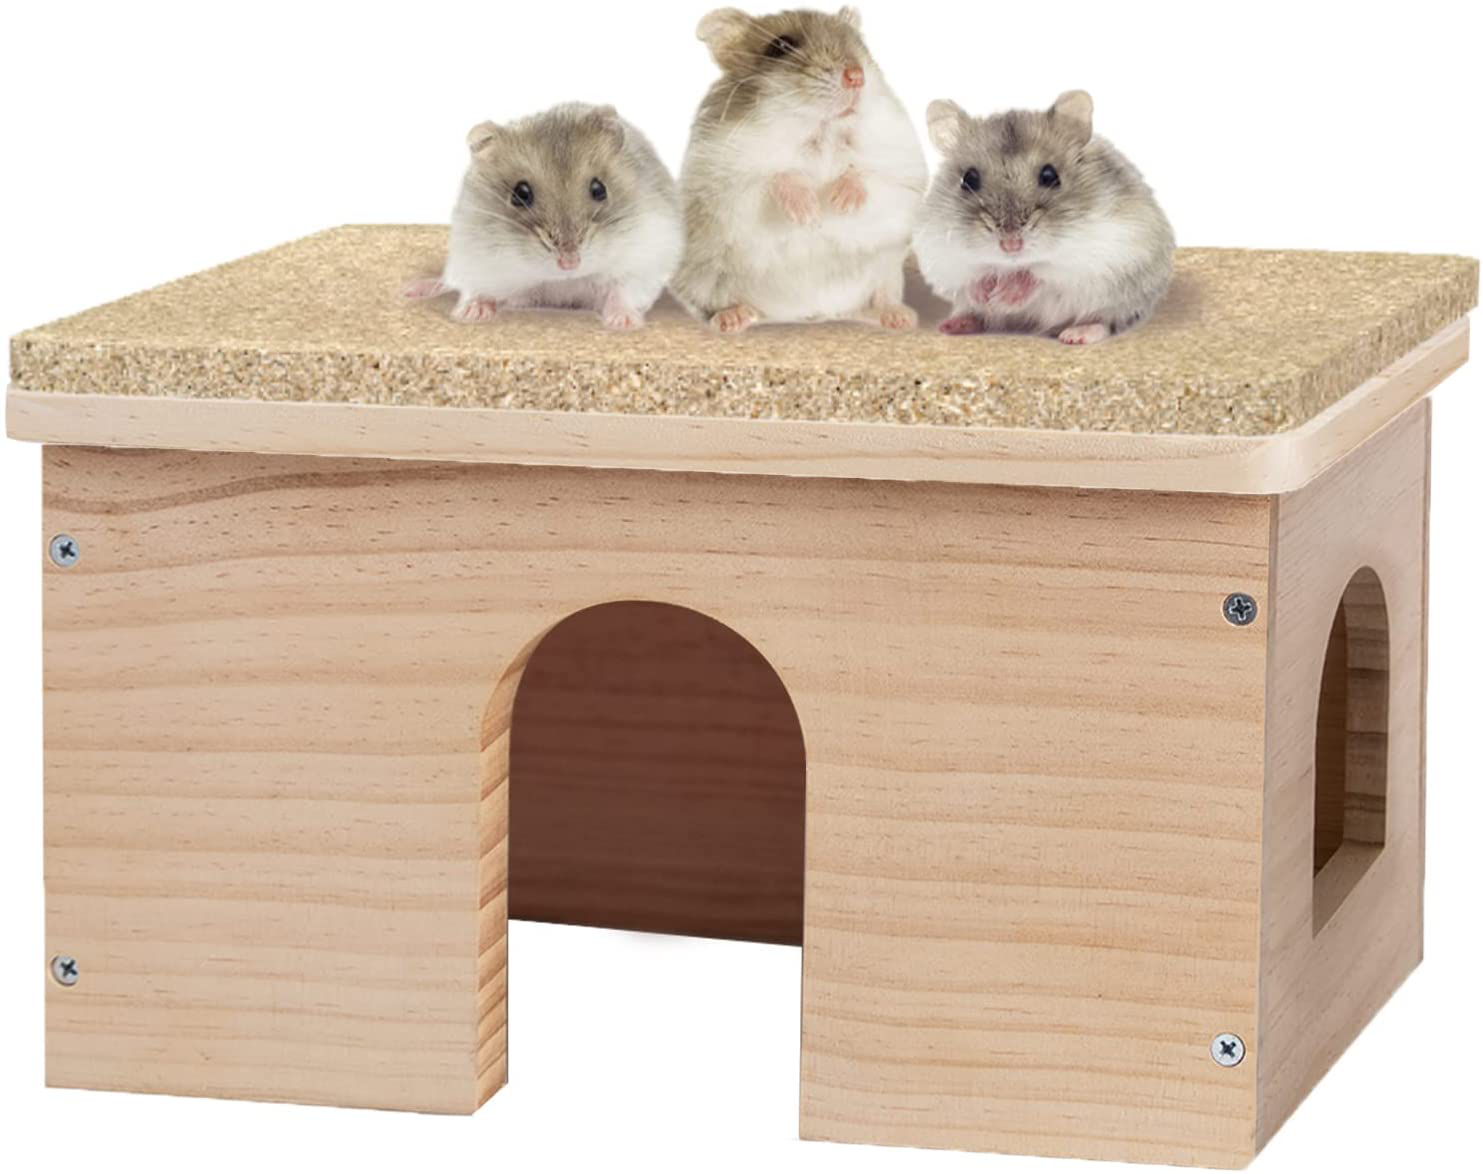 Guinea Pigs Wood House with Window, Small Animals Hut Hideout, Natural Habitat Cage for Guinea Pigs, Hamsters, Chinchillas Animals & Pet Supplies > Pet Supplies > Small Animal Supplies > Small Animal Habitats & Cages GIRVEM Hut Hideout #01  